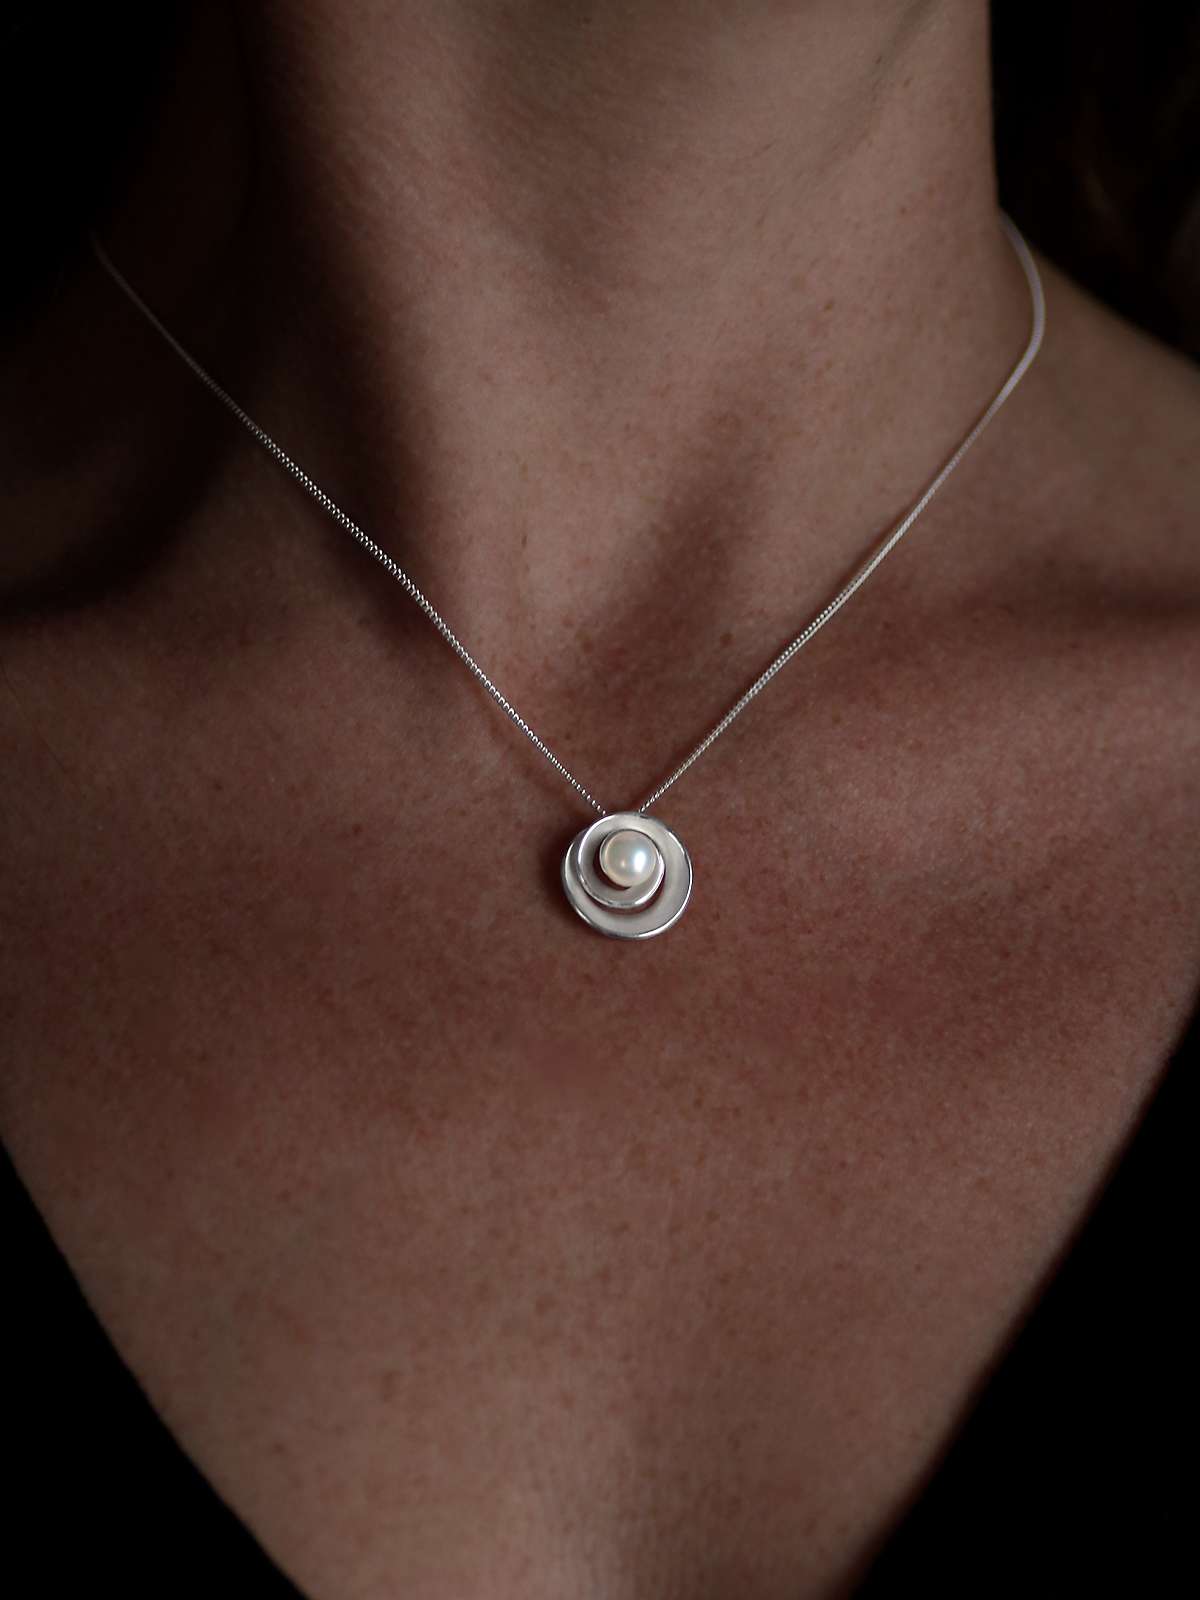 Buy Nina B Sterling Silver Swirl Pearl Necklace, White Online at johnlewis.com